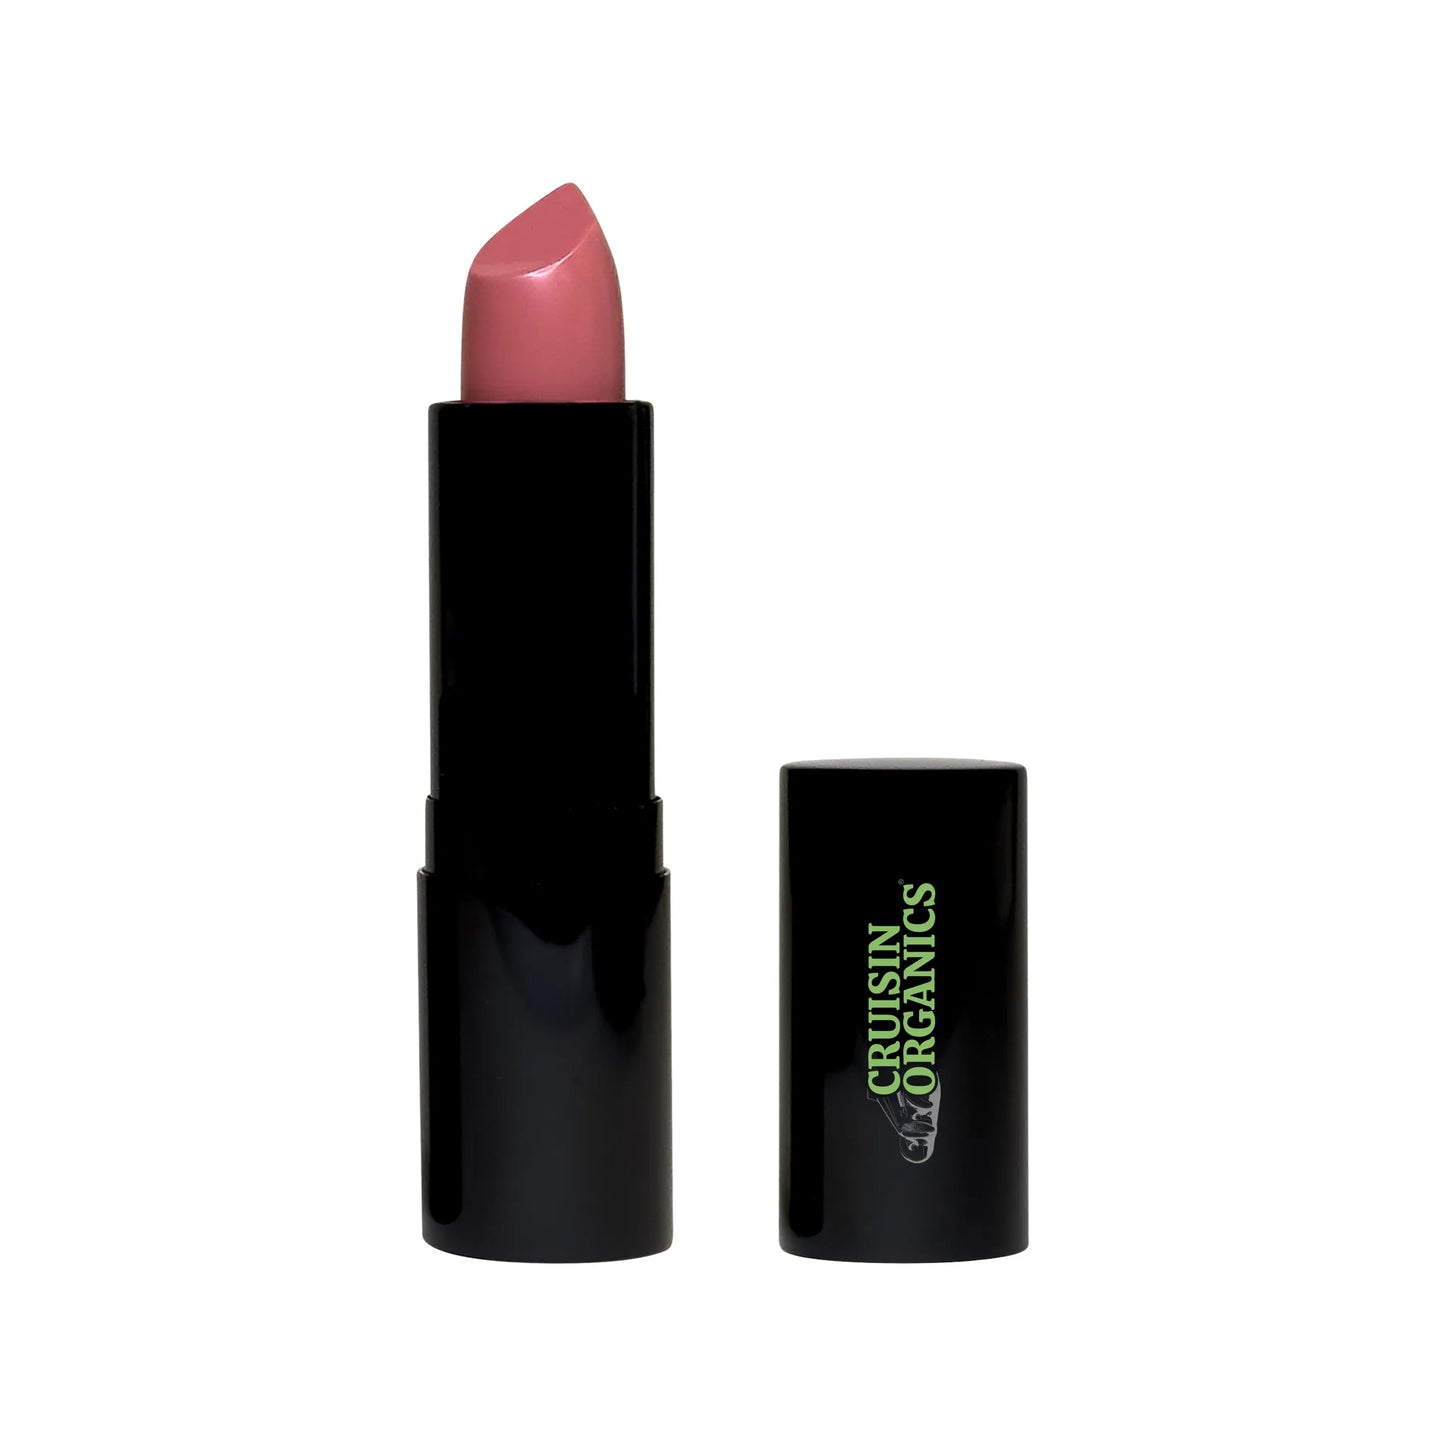 Darling Dahlia Cream Lipstick by Cruisin Organics. Several scientists have explained why the weather has changed, and cream lipstick aids in the clarity of healing lotions used on the lips, our plant-based ingredients.